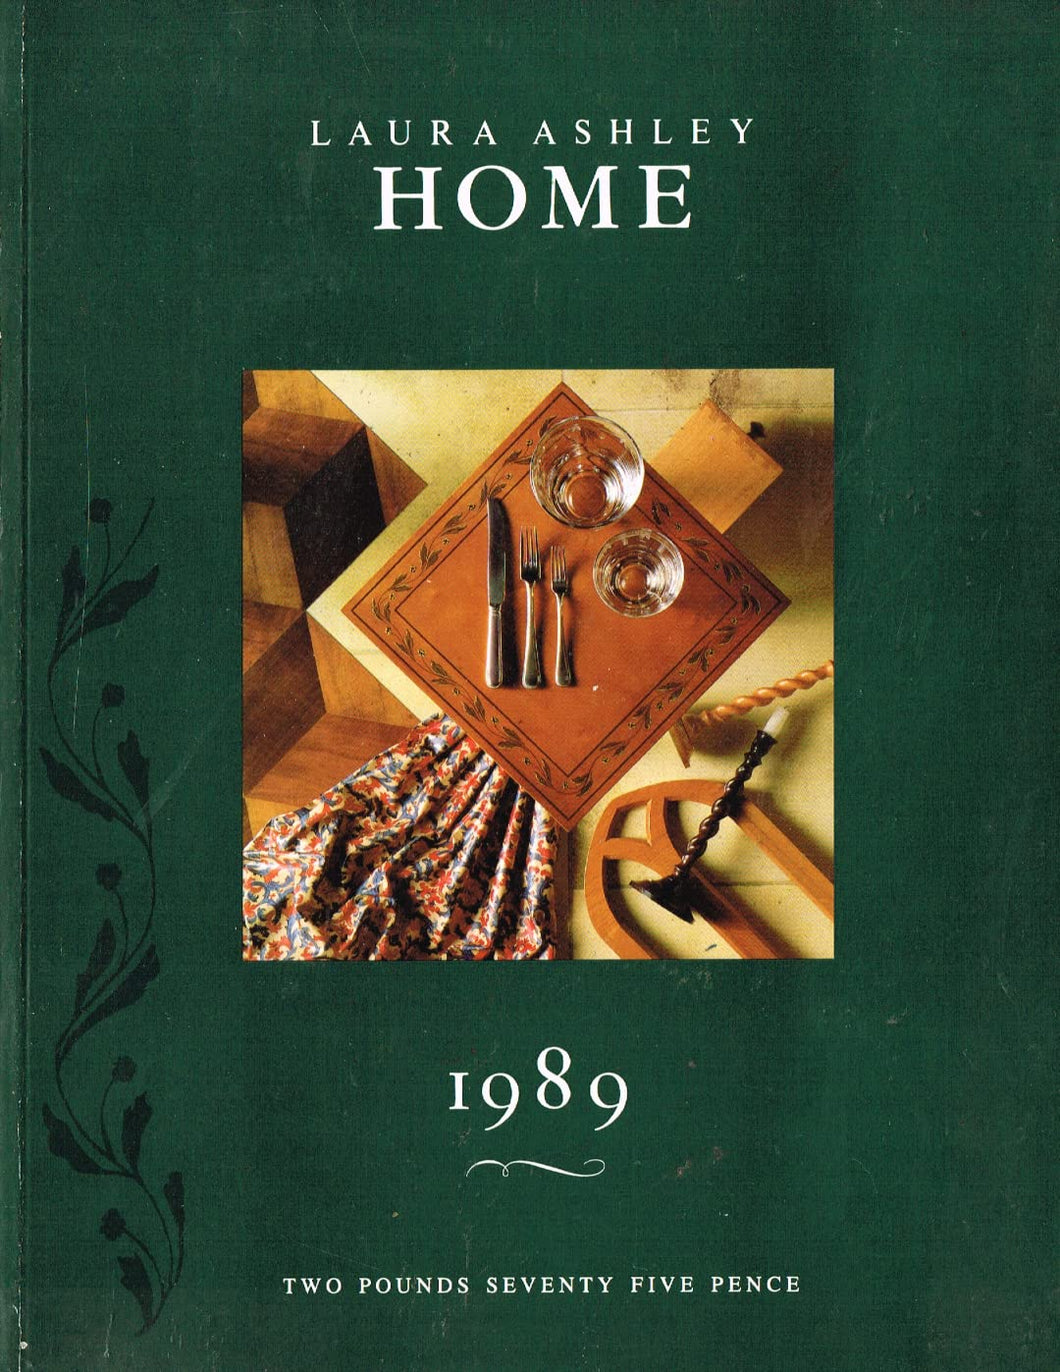 Laura Ashley Complete Guide to Home Decorating: Written by Deborah Evans, 1989 Edition, Publisher: Weidenfeld & Nicolson [Hardcover]